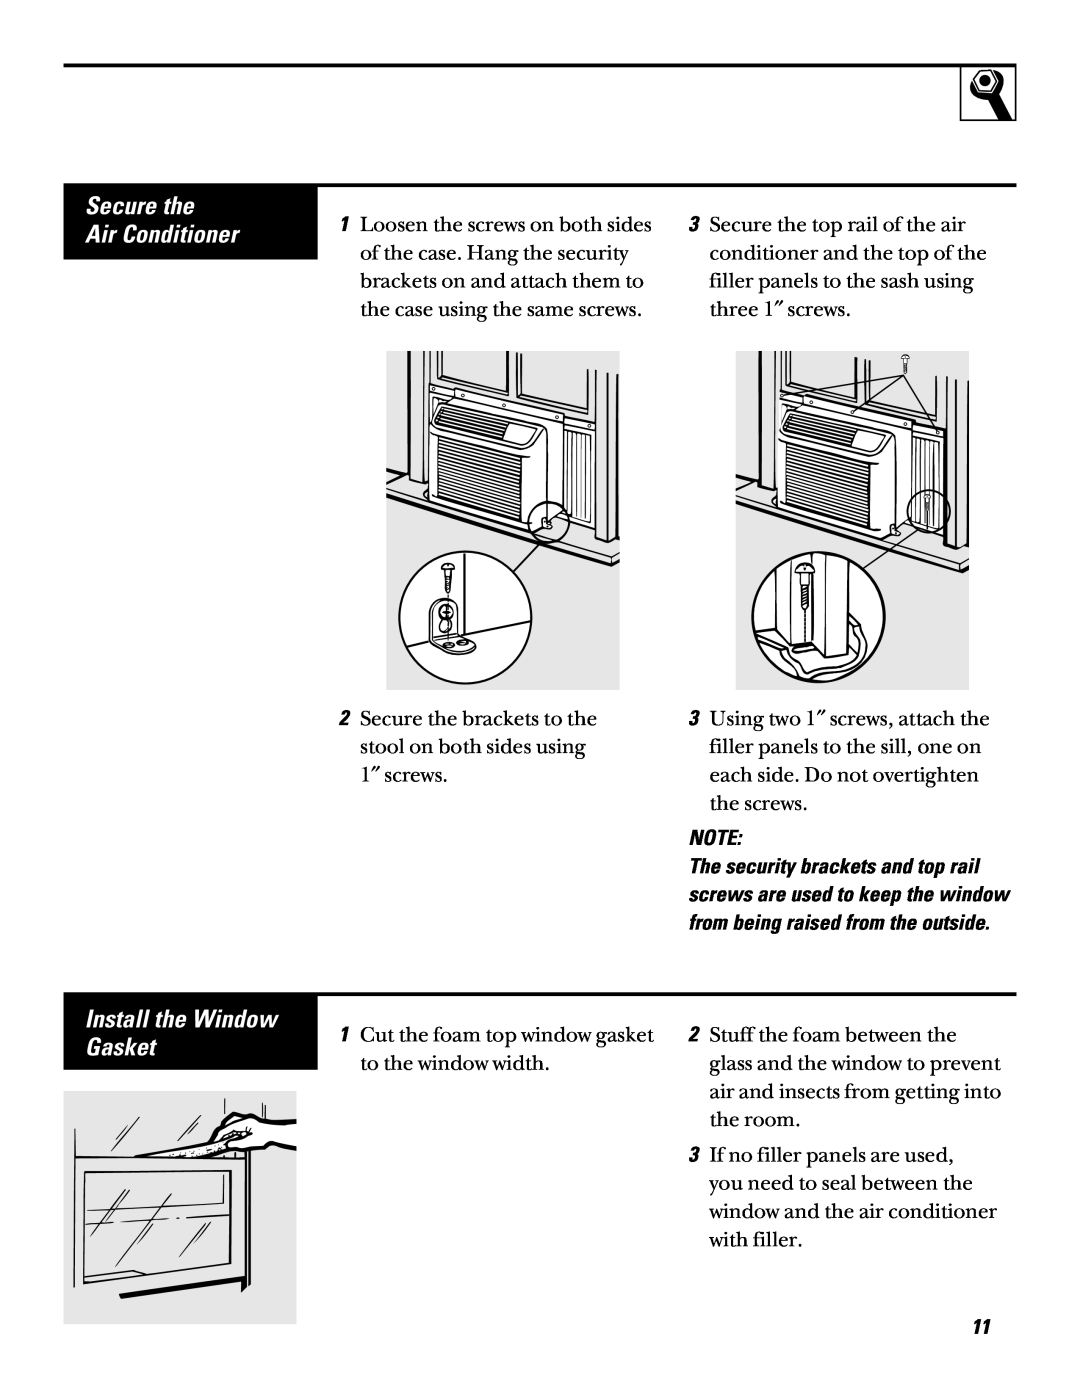 GE AQV06, AQV05 installation instructions Secure the Air Conditioner, Install the Window Gasket 